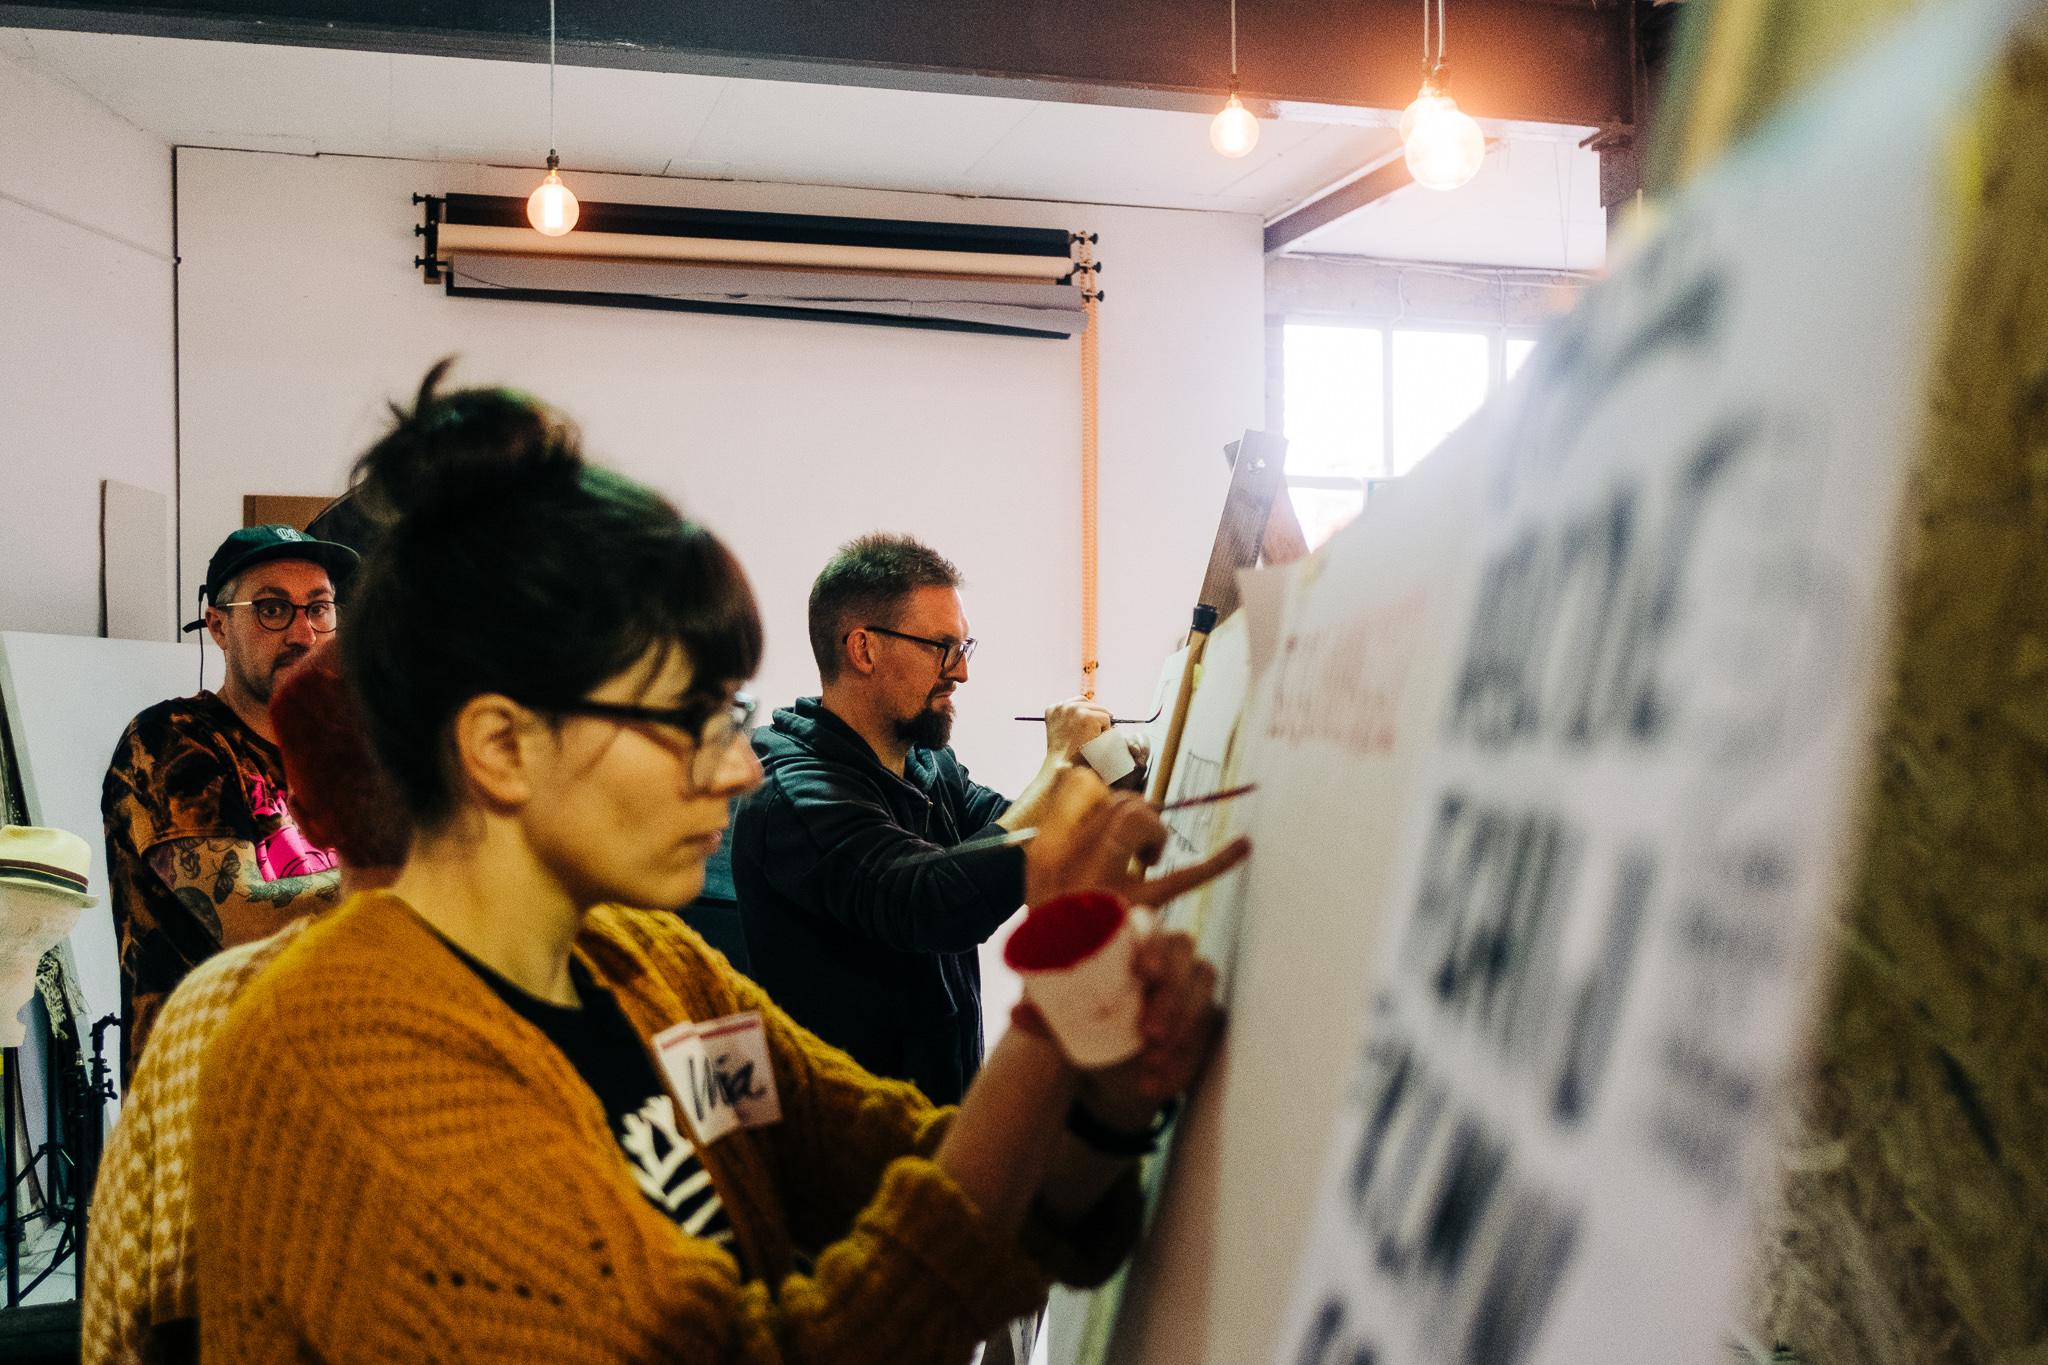 'INTRODUCTION TO SIGNPAINTING AND CASUAL LETTERING' Course. 16th April